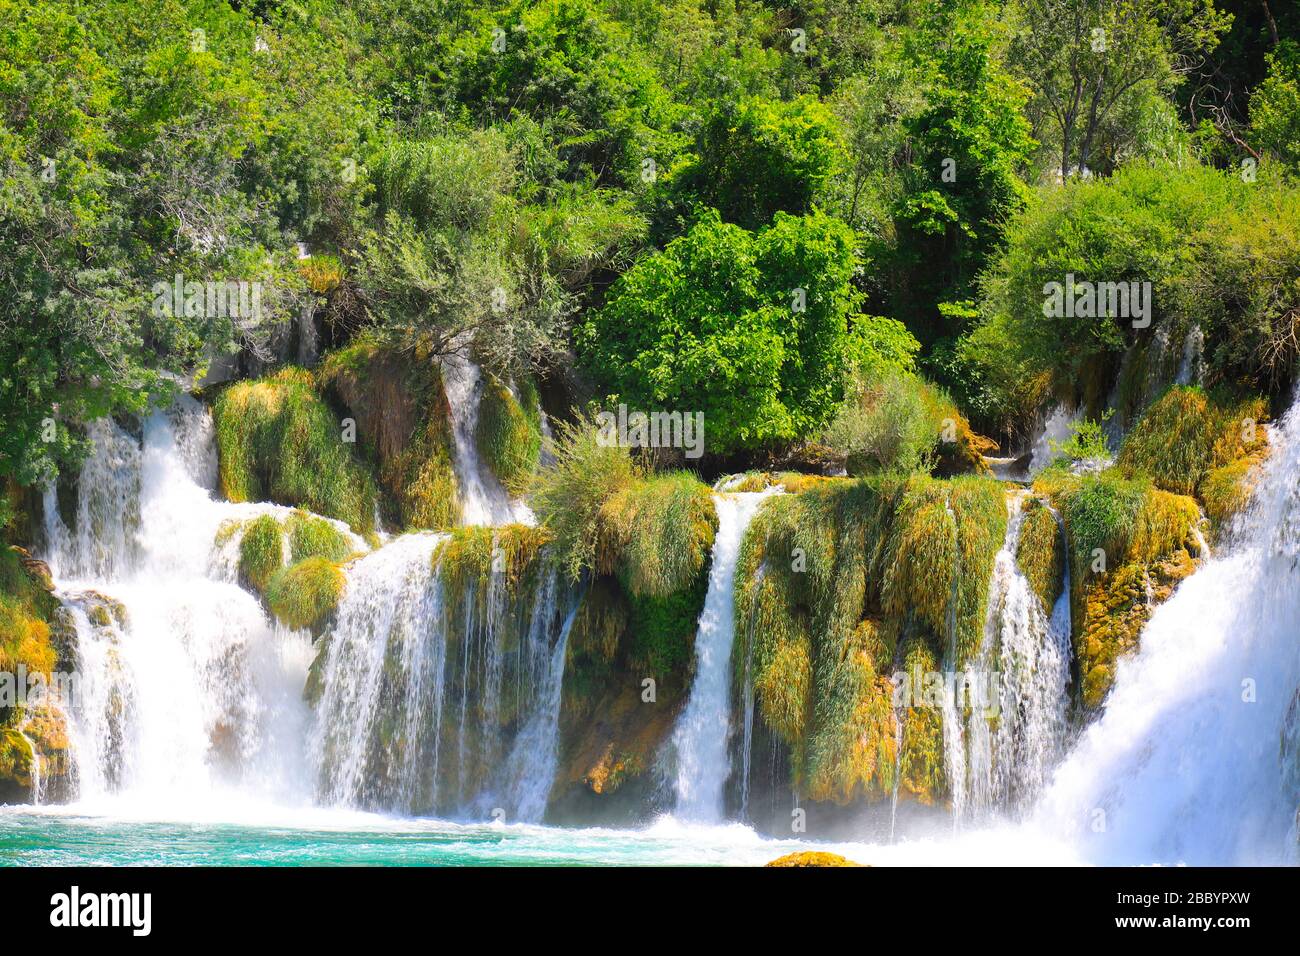 A picturesque cascade waterfall among large stones in the Krka Landscape Park, Croatia in spring or summer. The best big beautiful Croatian waterfalls Stock Photo